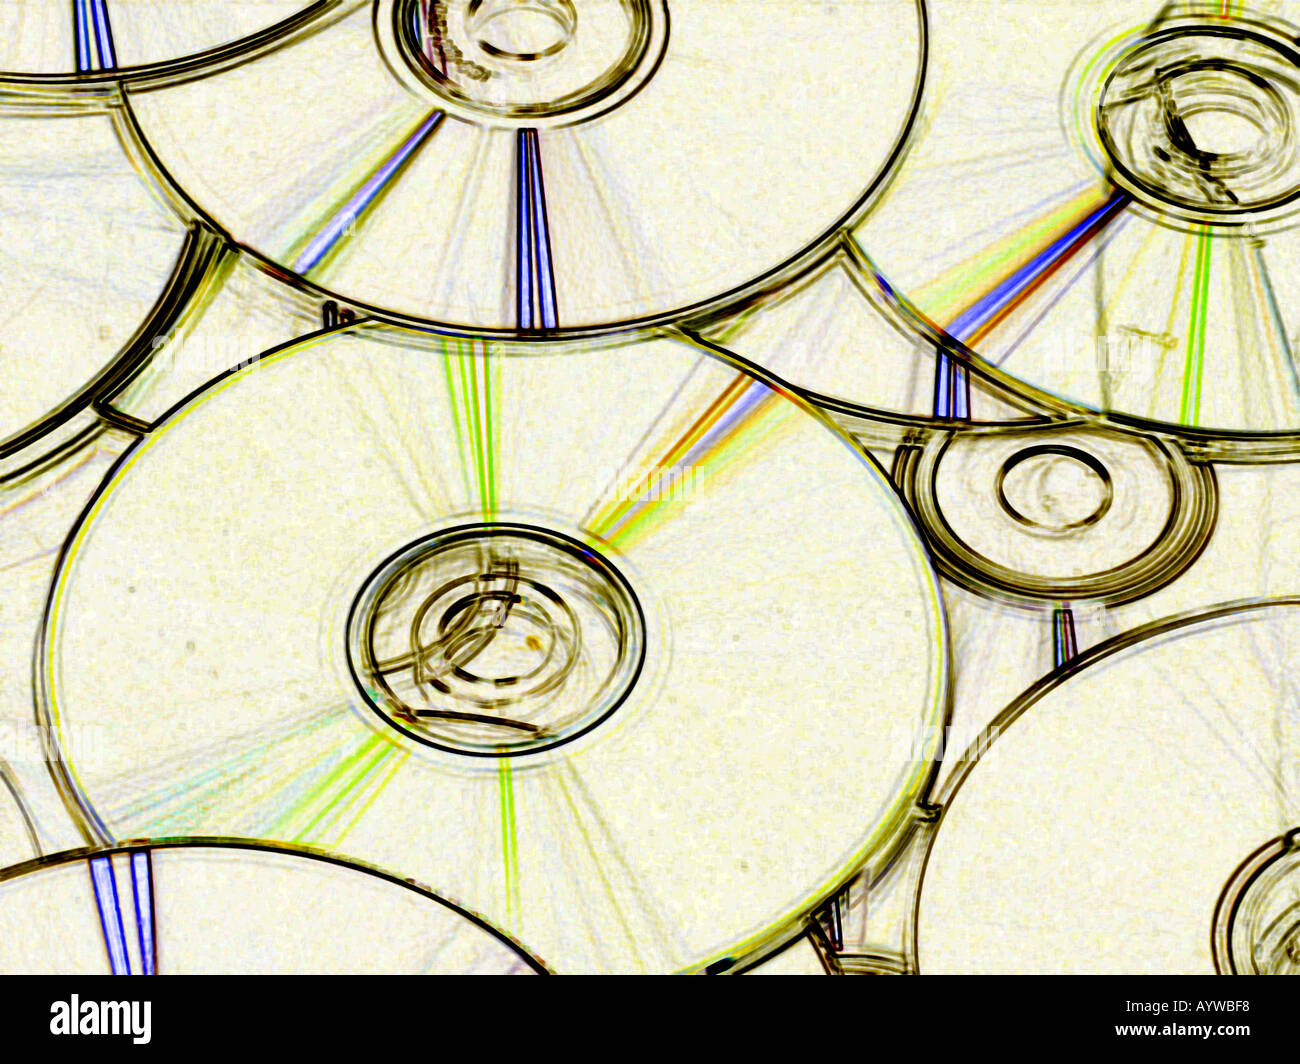 Cd-rom CD-ROM compact disc dur Banque D'Images